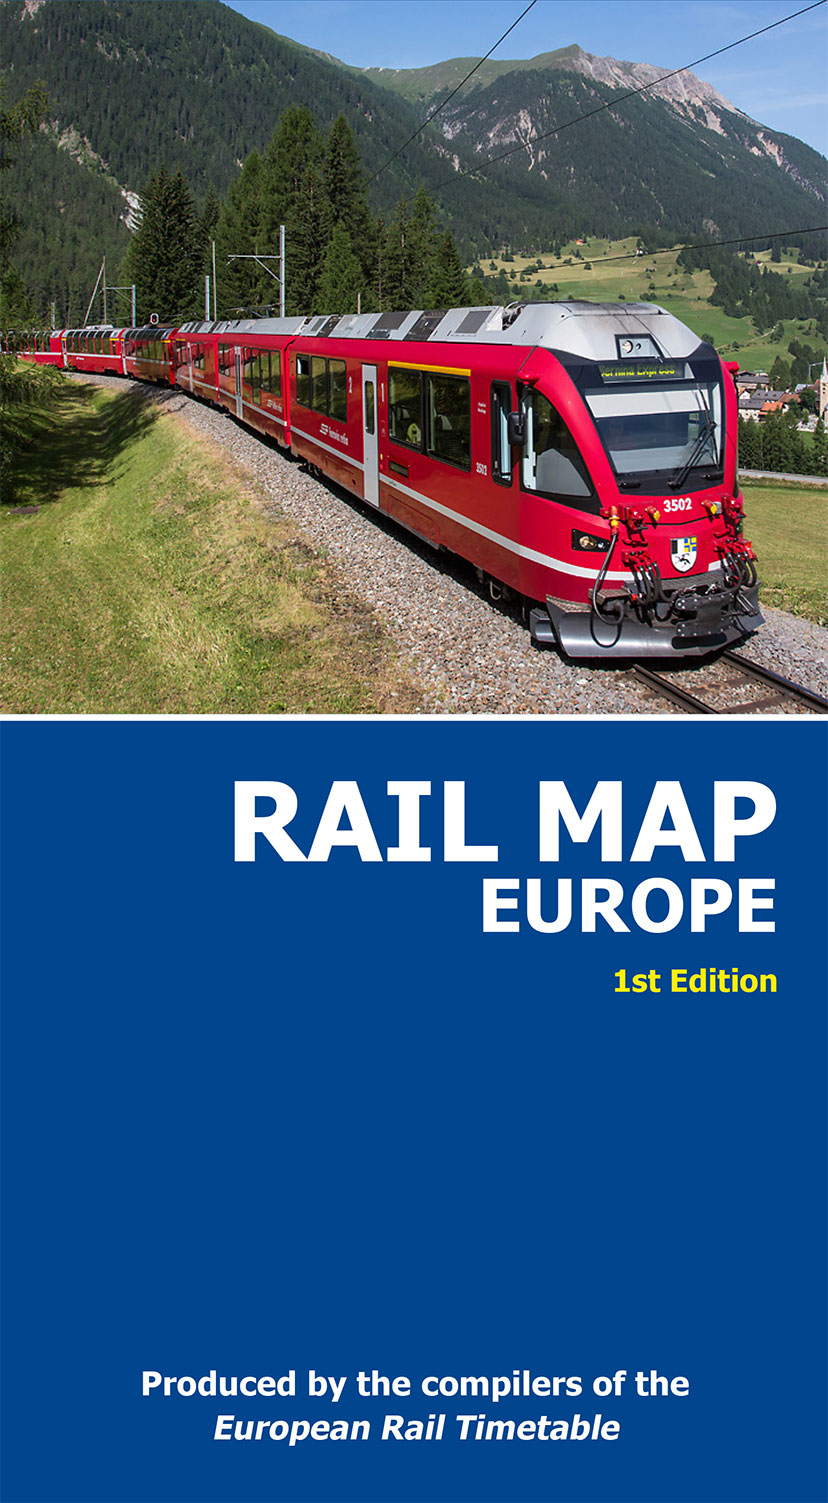 <p>1st edition of the Rail Map Europe, published in December 2015</p>